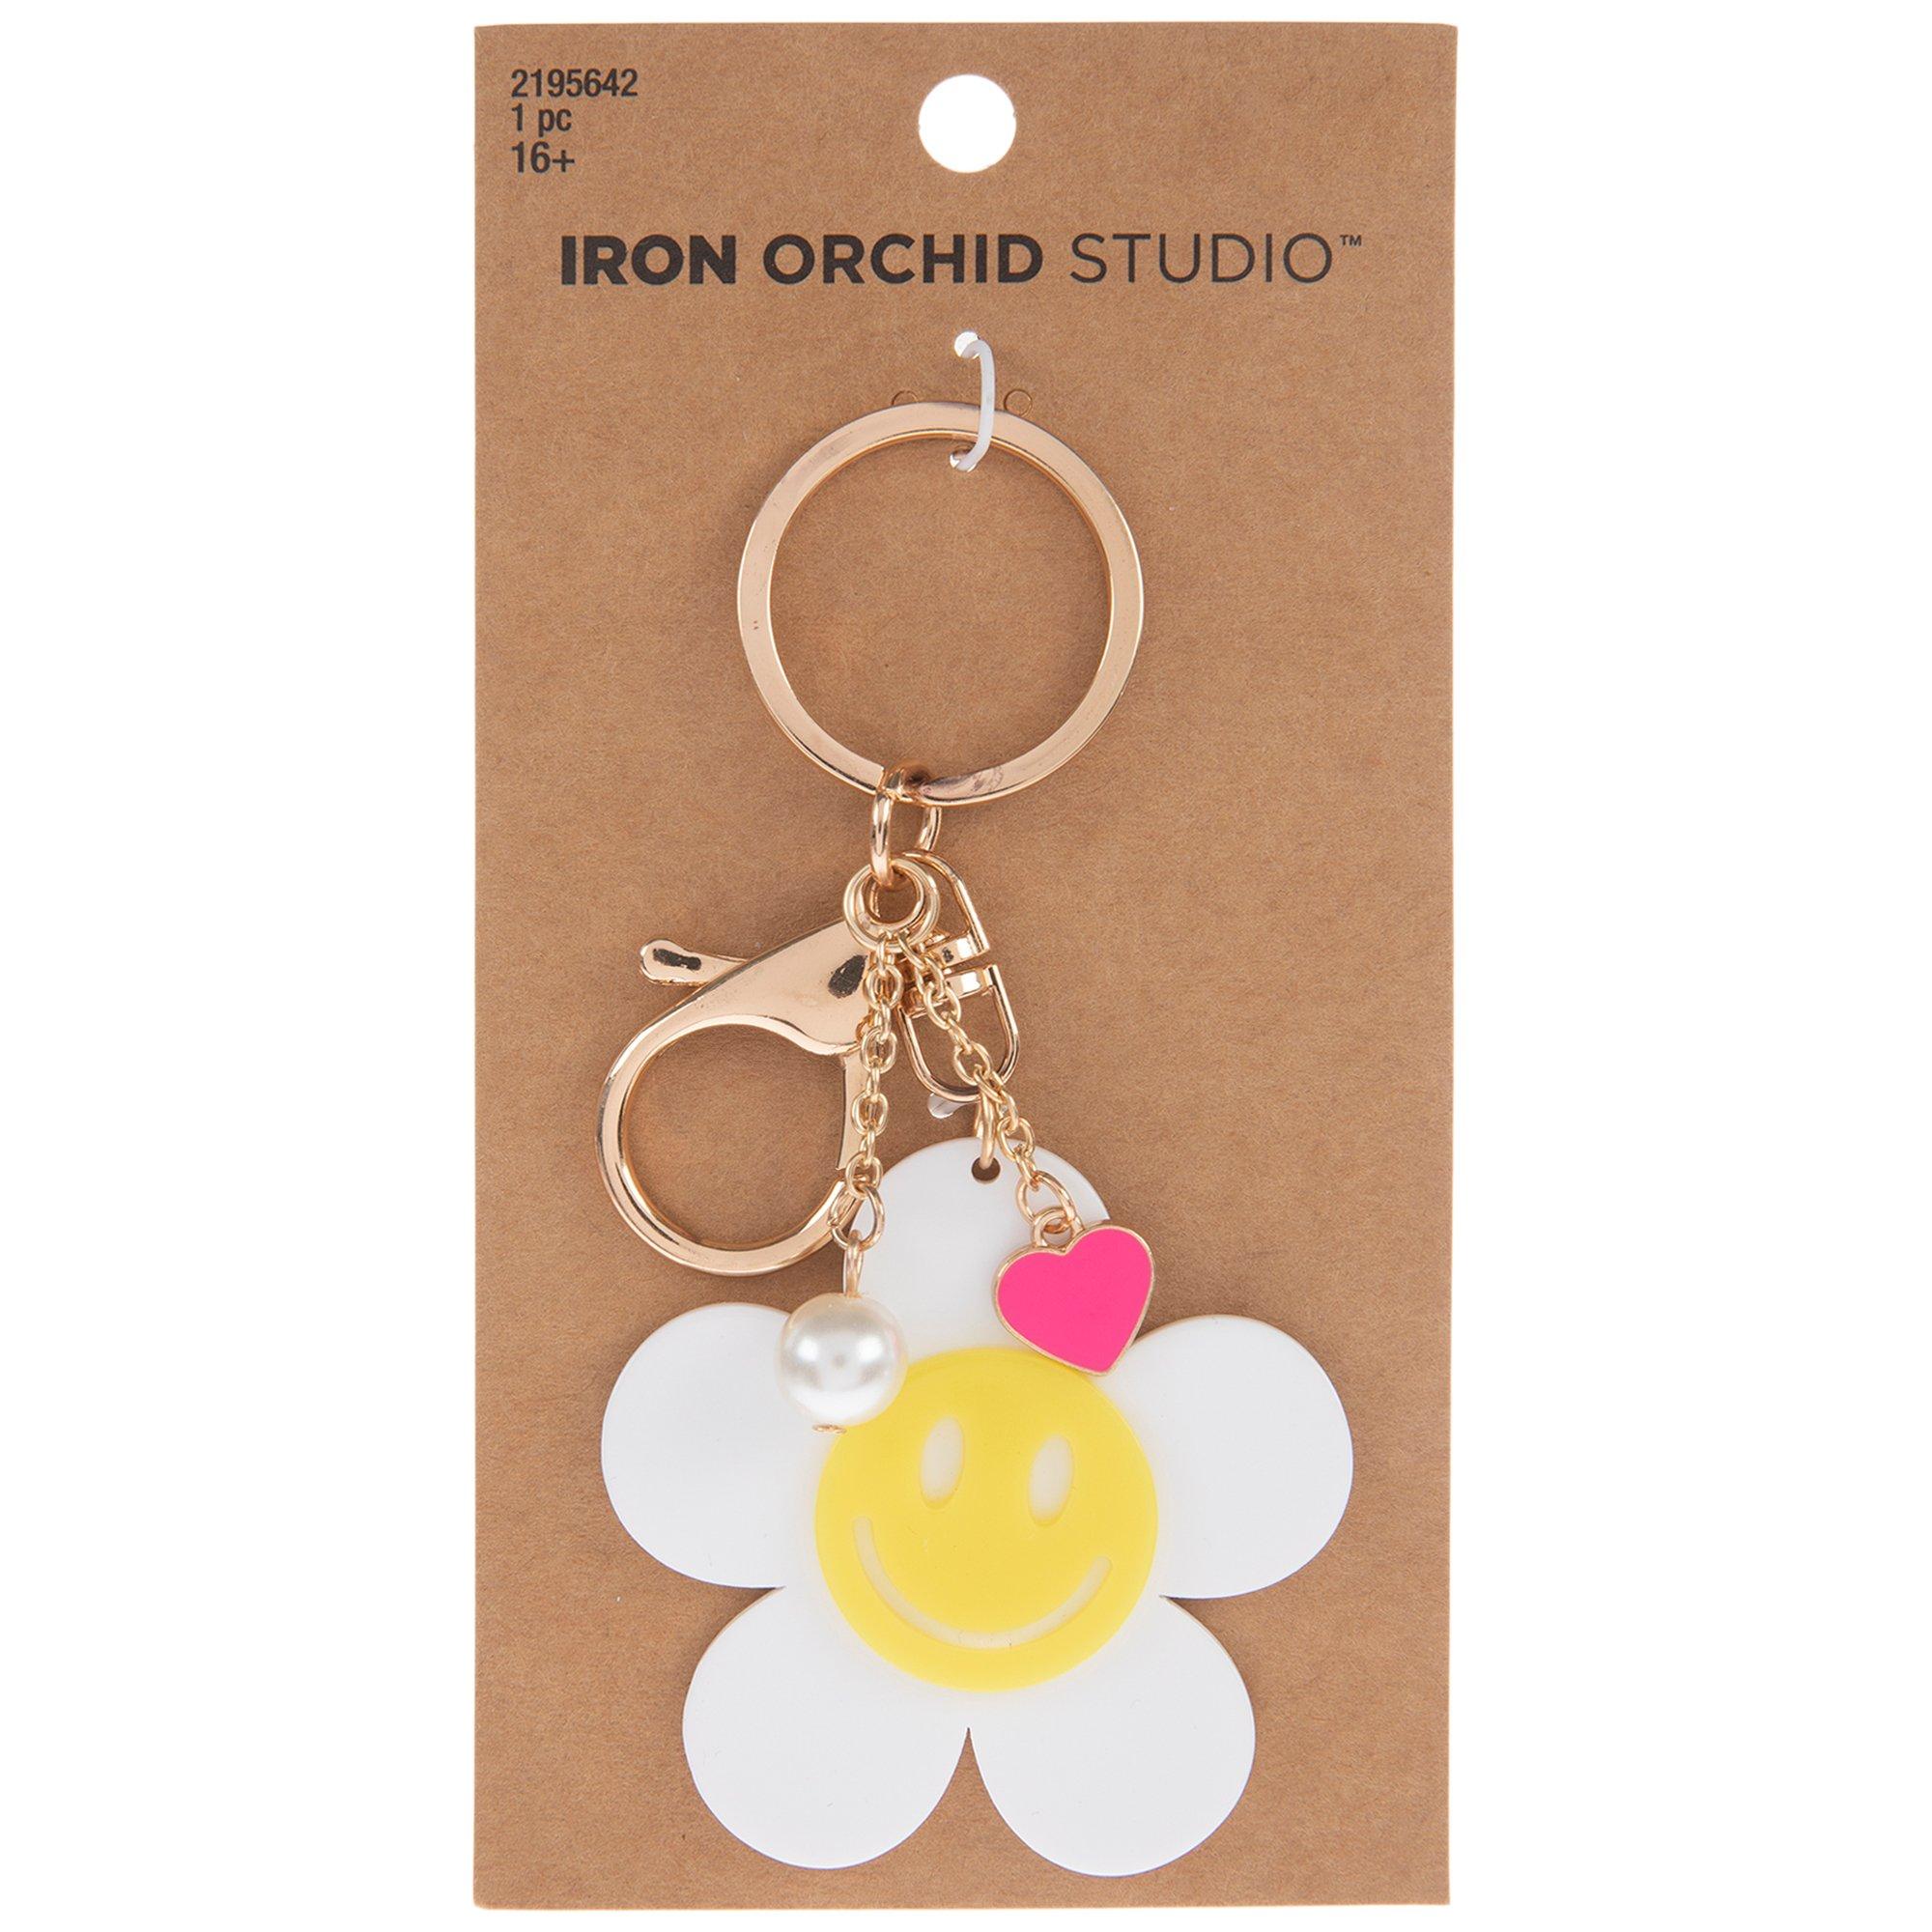 Sakura Acrylic Flower Keychain Stylish Oreillys Key Fob Chain Ring For  Women, Perfect For Schoolbags, Bags, And More Cute Gold Metal Keyrings  Ideal Gift For Girls From Yambags, $2.56